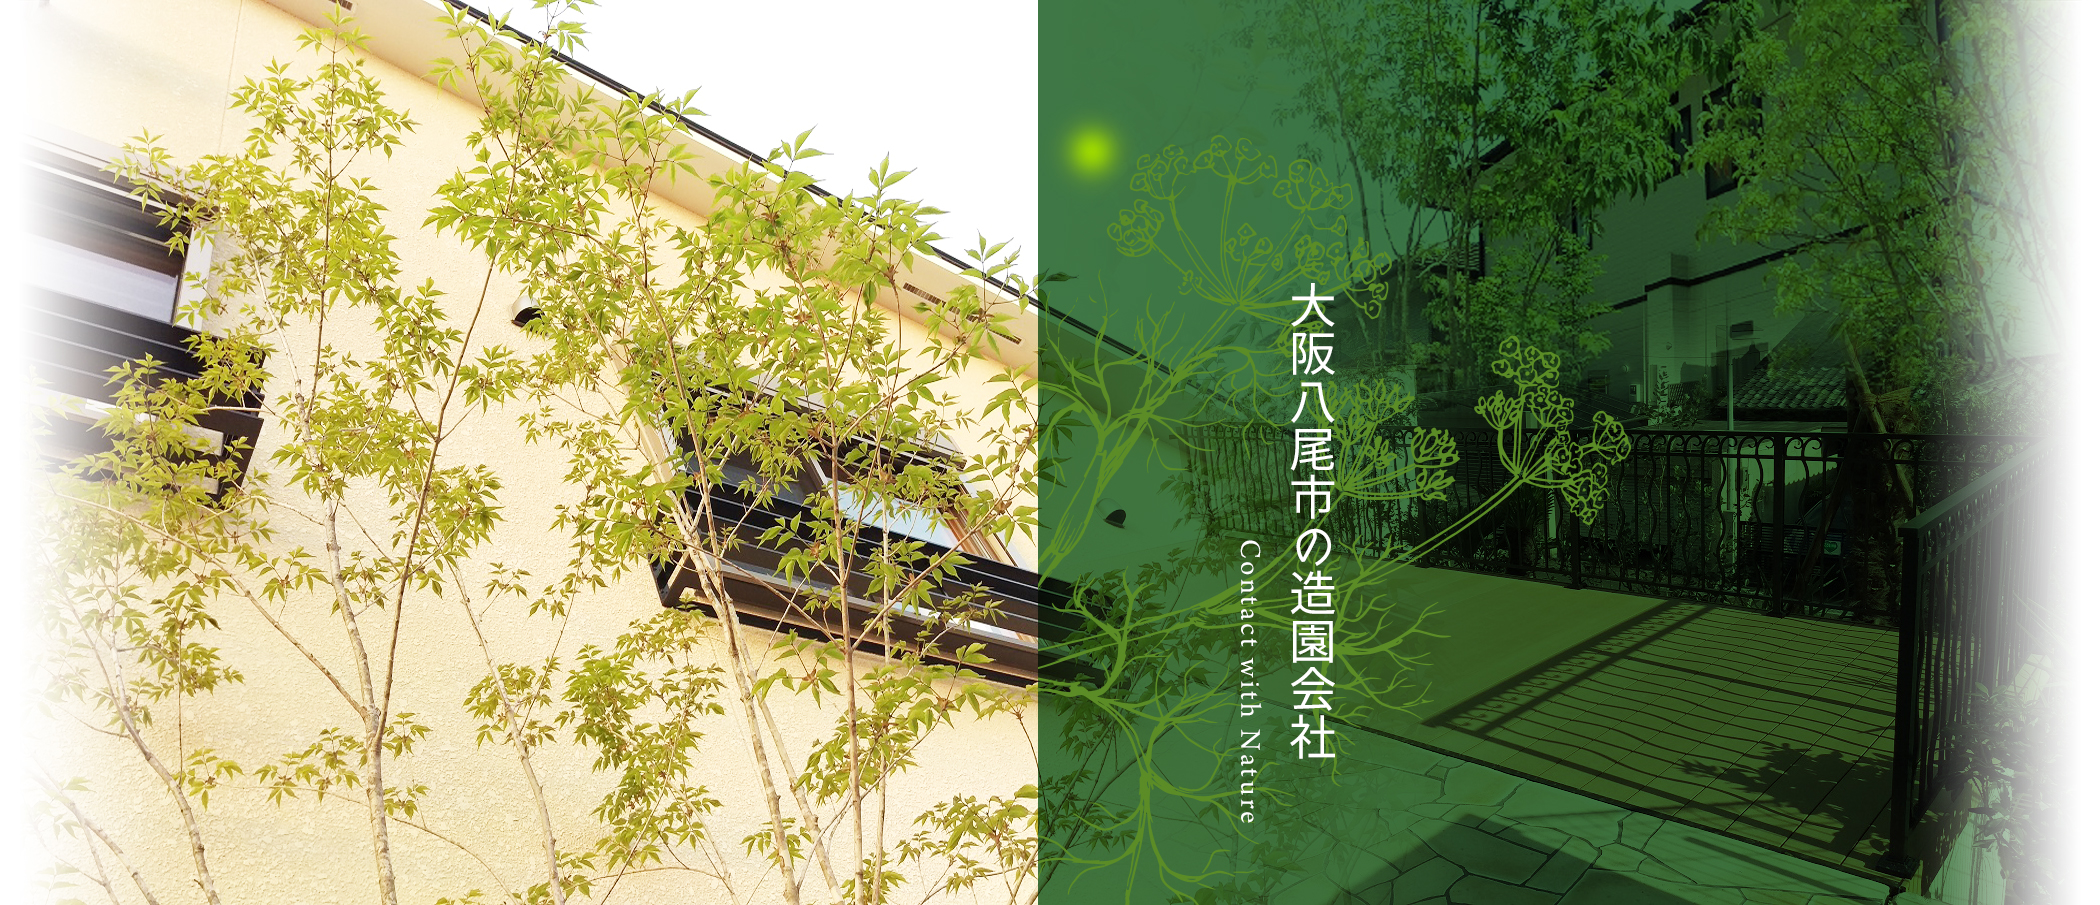 Contact with Nature 大阪八尾市の造園会社